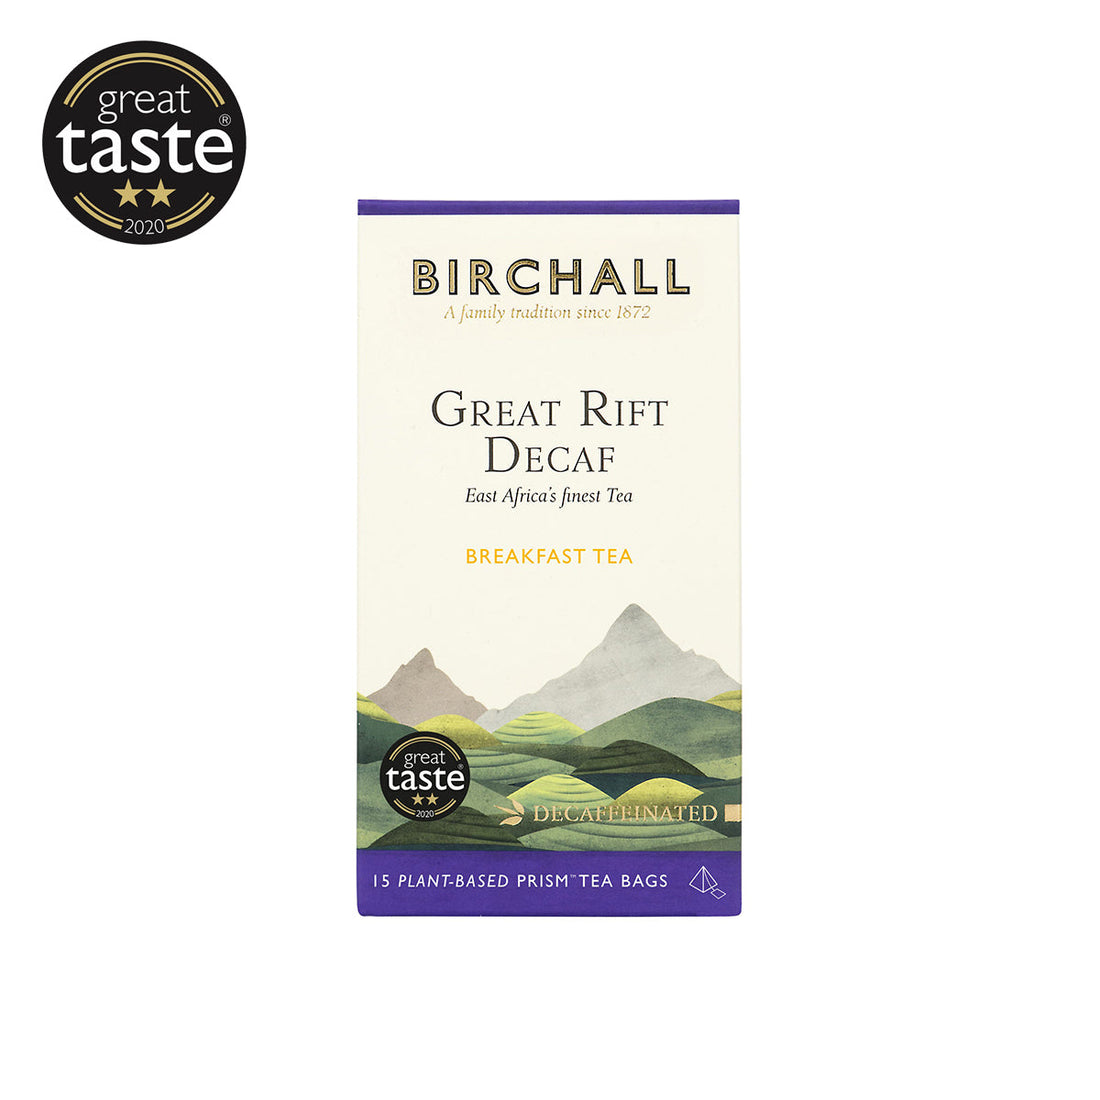 Birchall, Birchall Plant-Based Prism Tea Bags 15pcs - Great Rift Decaf, Redber Coffee